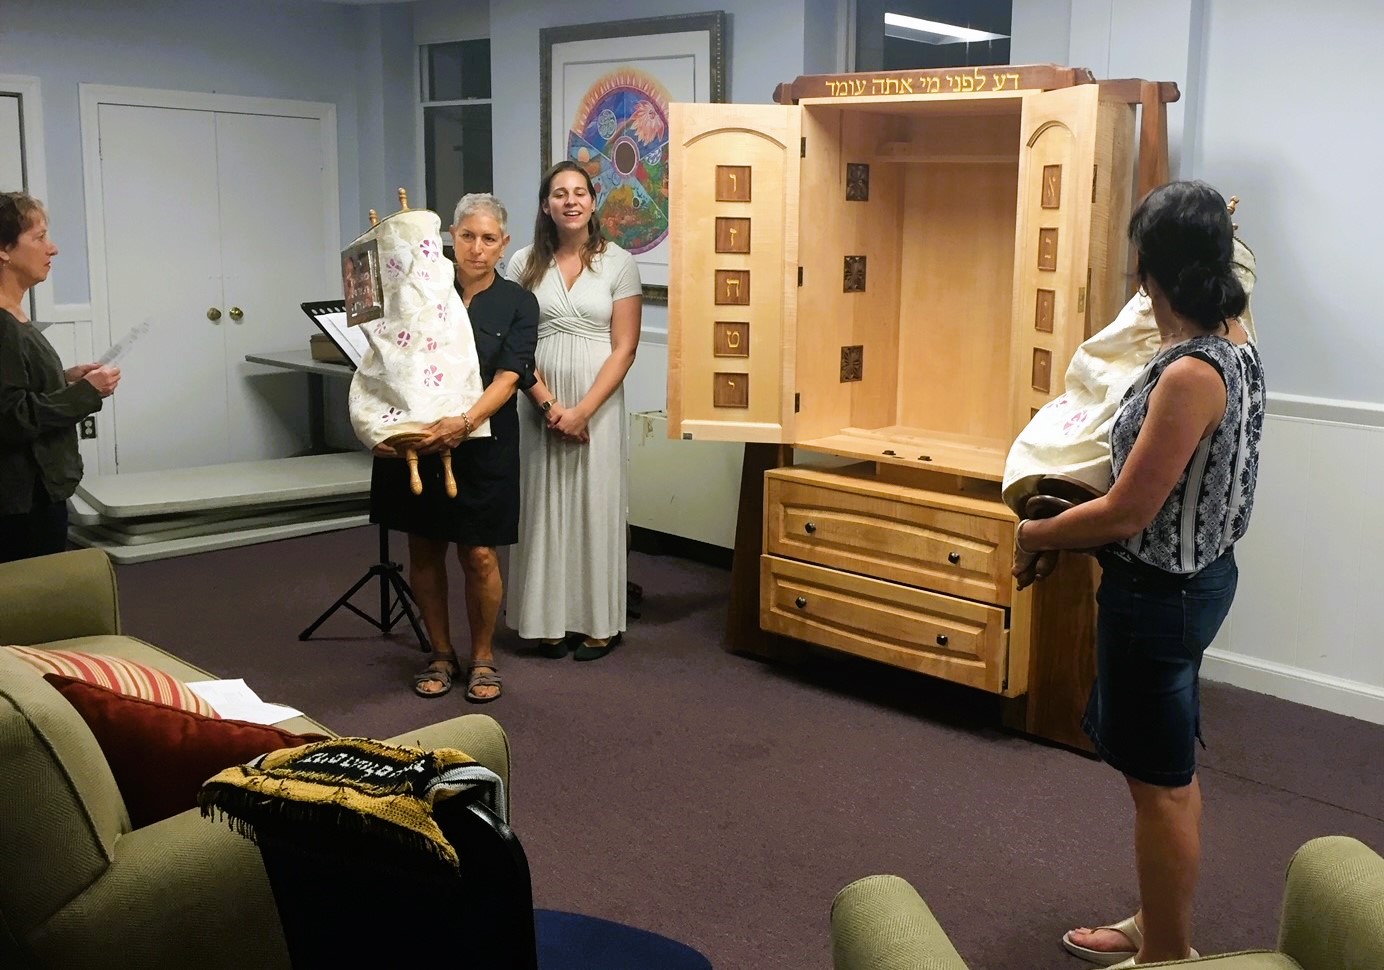 Hill Havurah worshipers hold Torahs from the porable ark during a religious service in the Shalom Room at Lutheran Church of the Reformation.